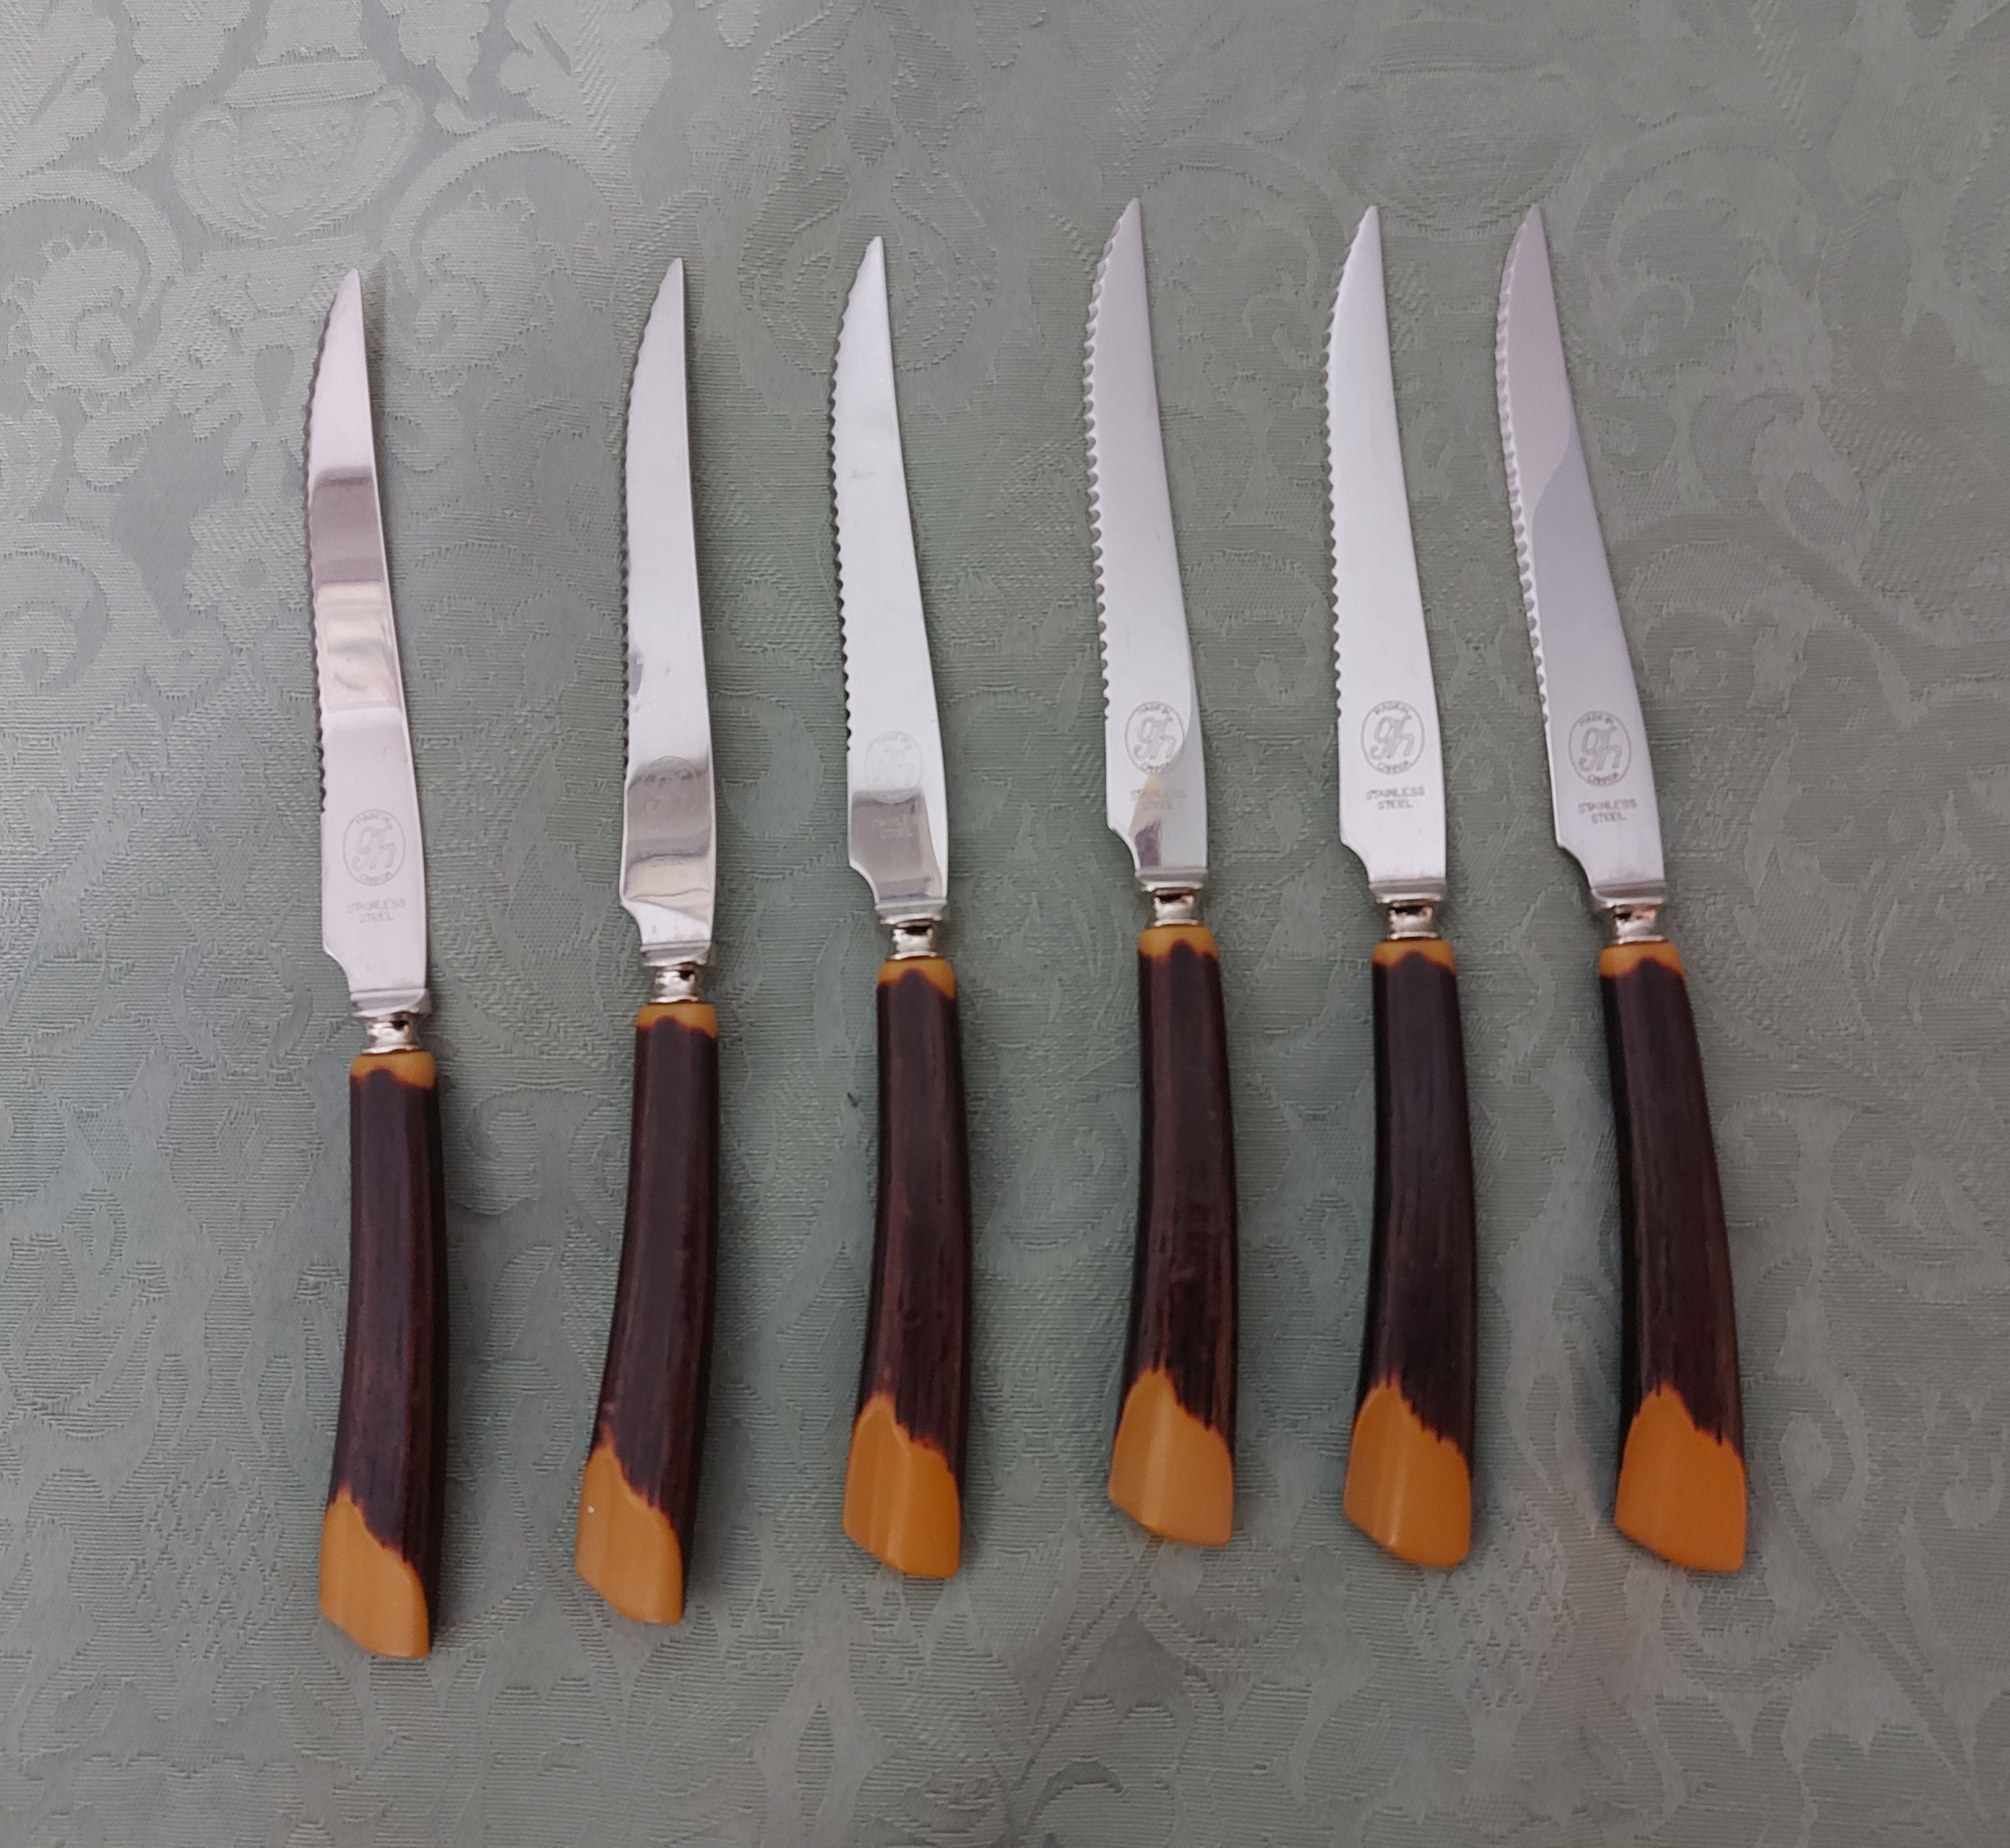 Quicut Steak Knife Set, Promotional Gift From KIRBY 